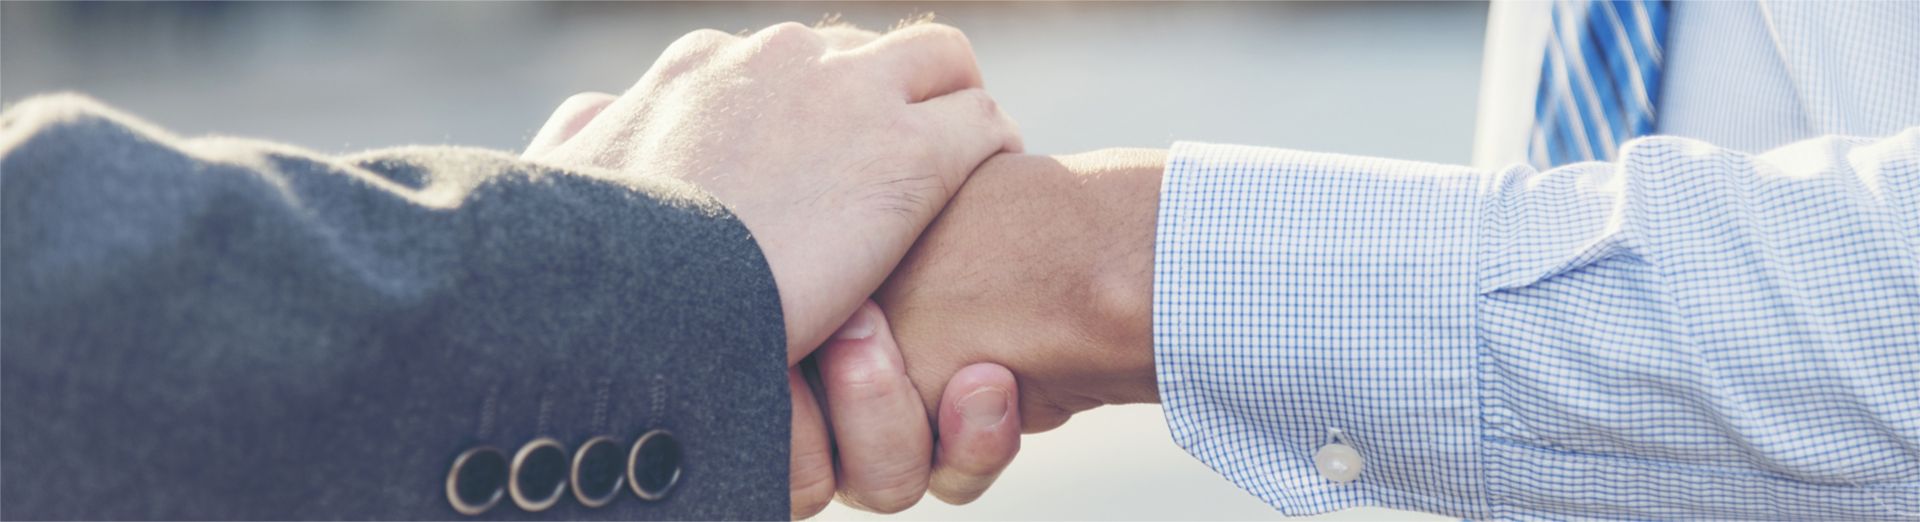 Image of two businessmen shaking hands